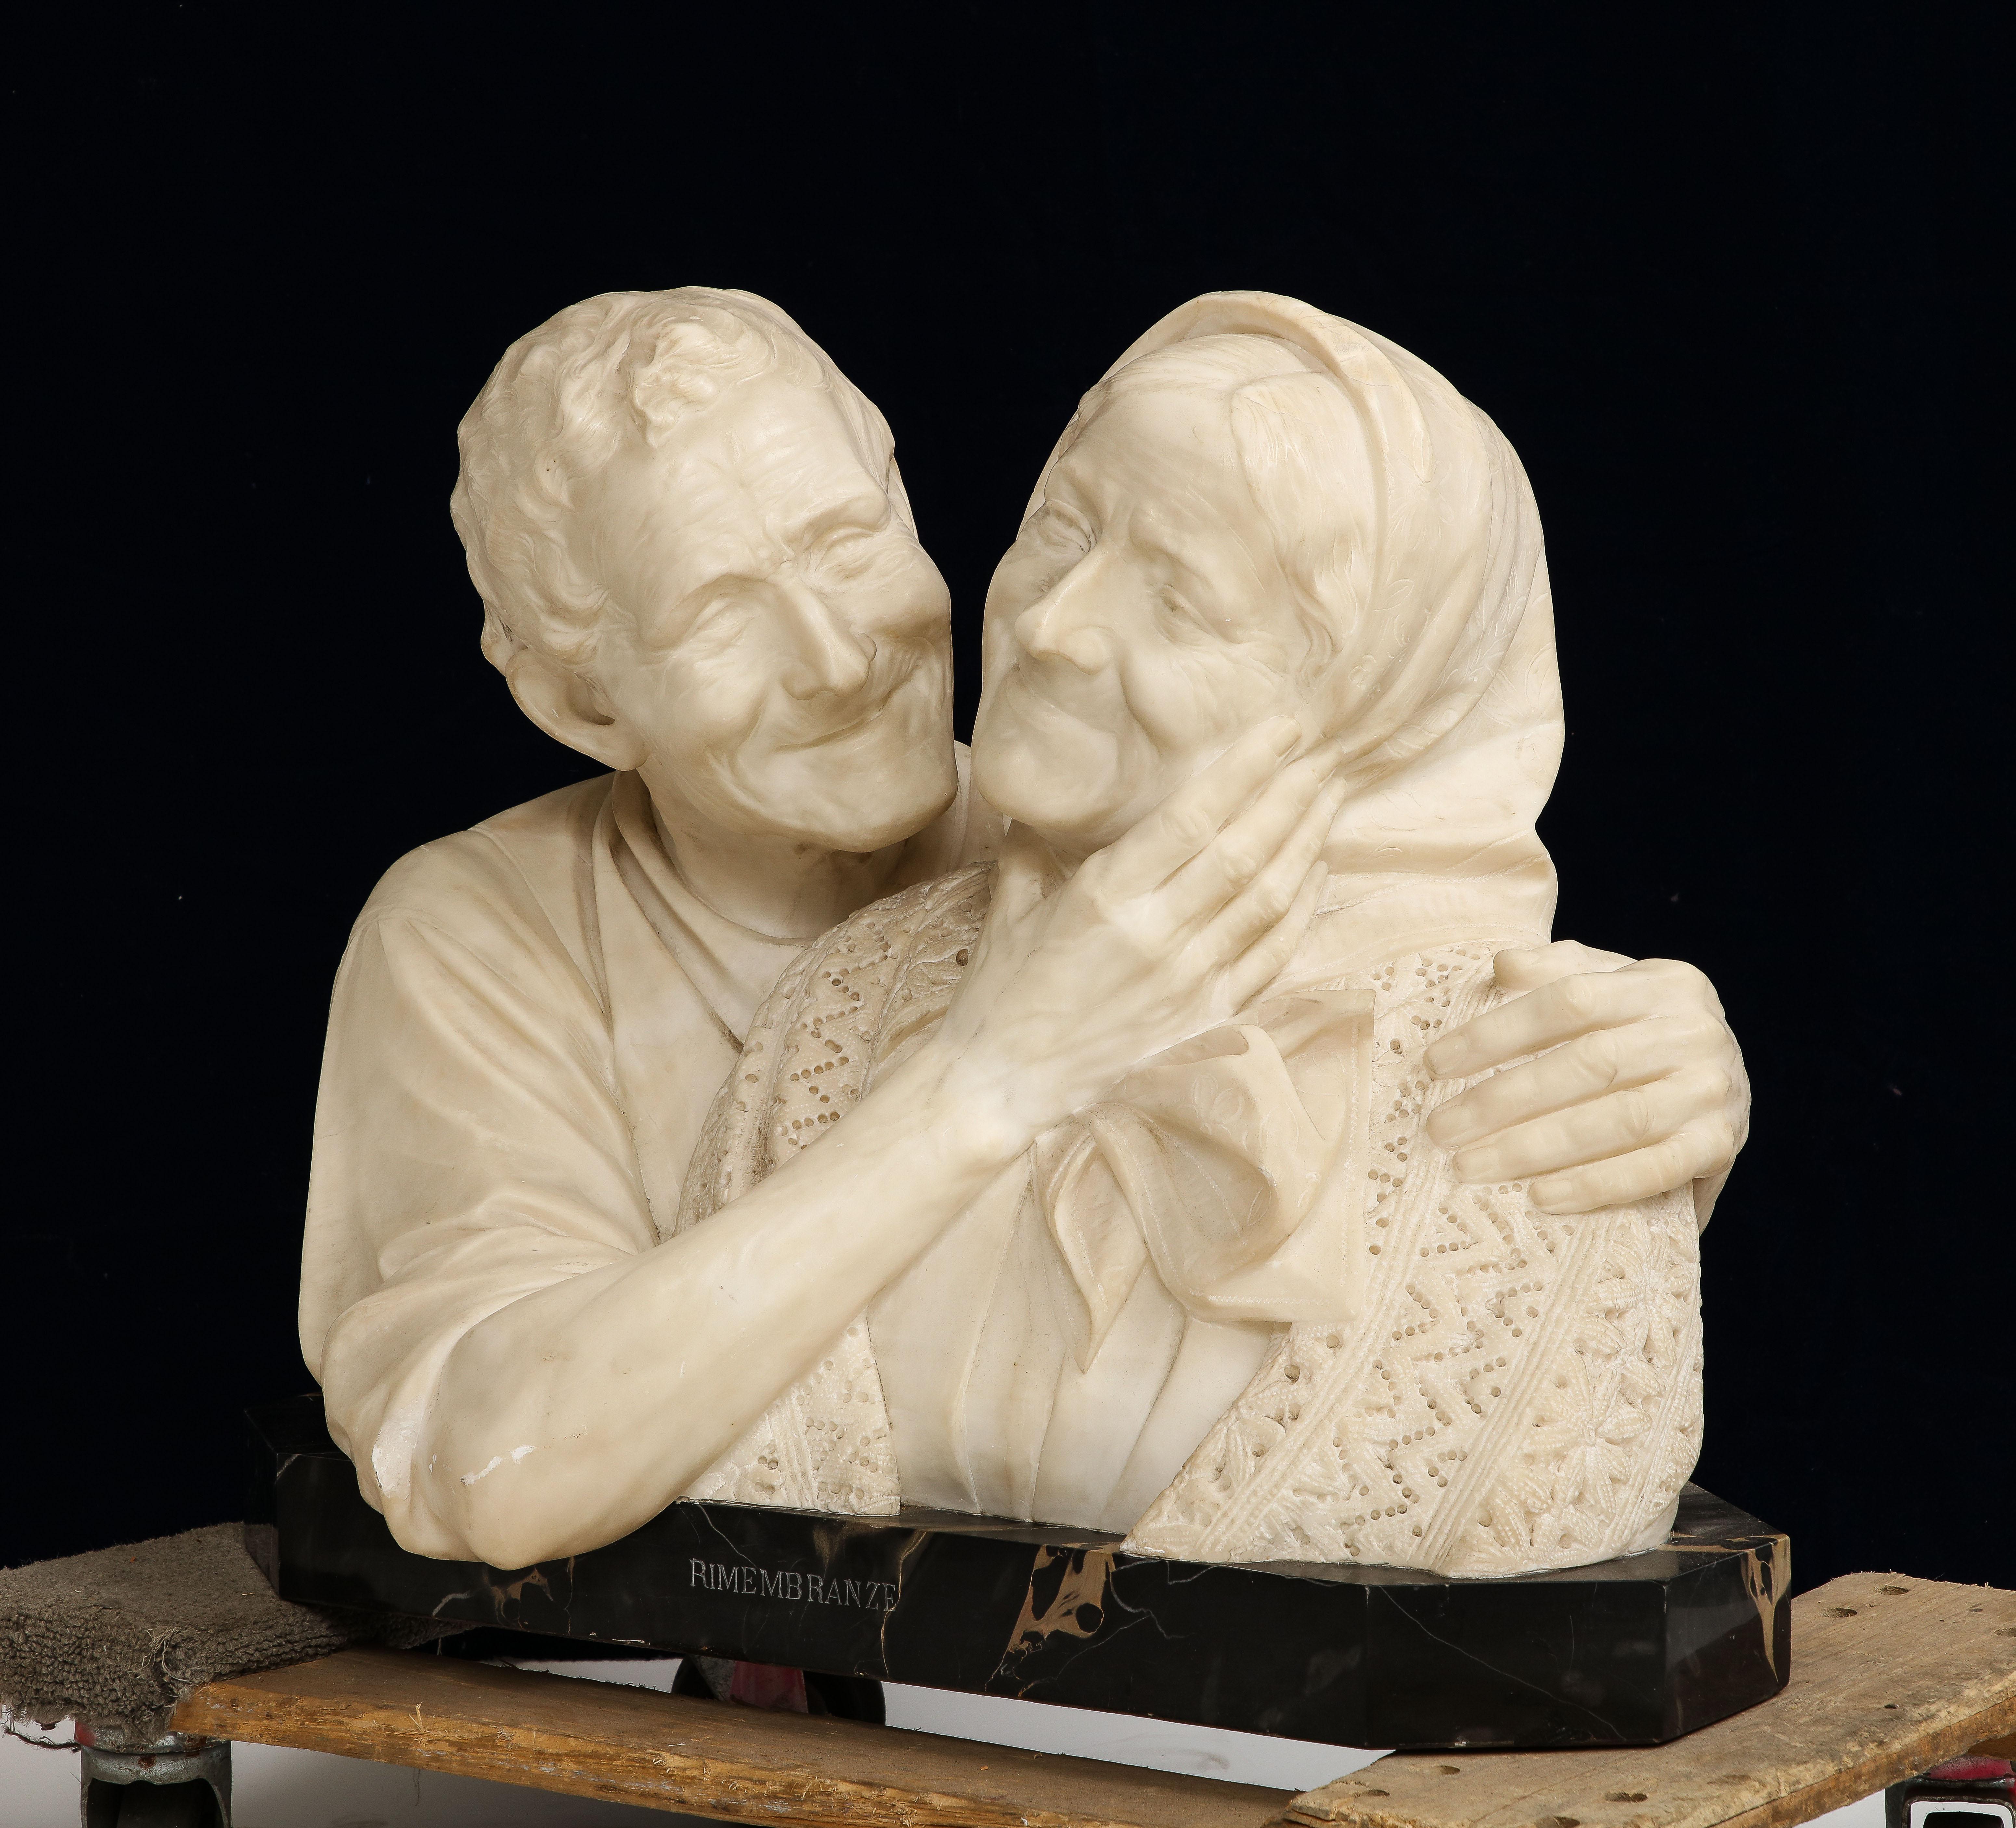 A monumental 19th C. Italian Marble Bust of The Grandparents, Titled: Rimembranze, Signed Vichi. 
 Presenting an exquisite Italian masterpiece from the 1800s, we have a captivating white Carrara marble bust group entitled 